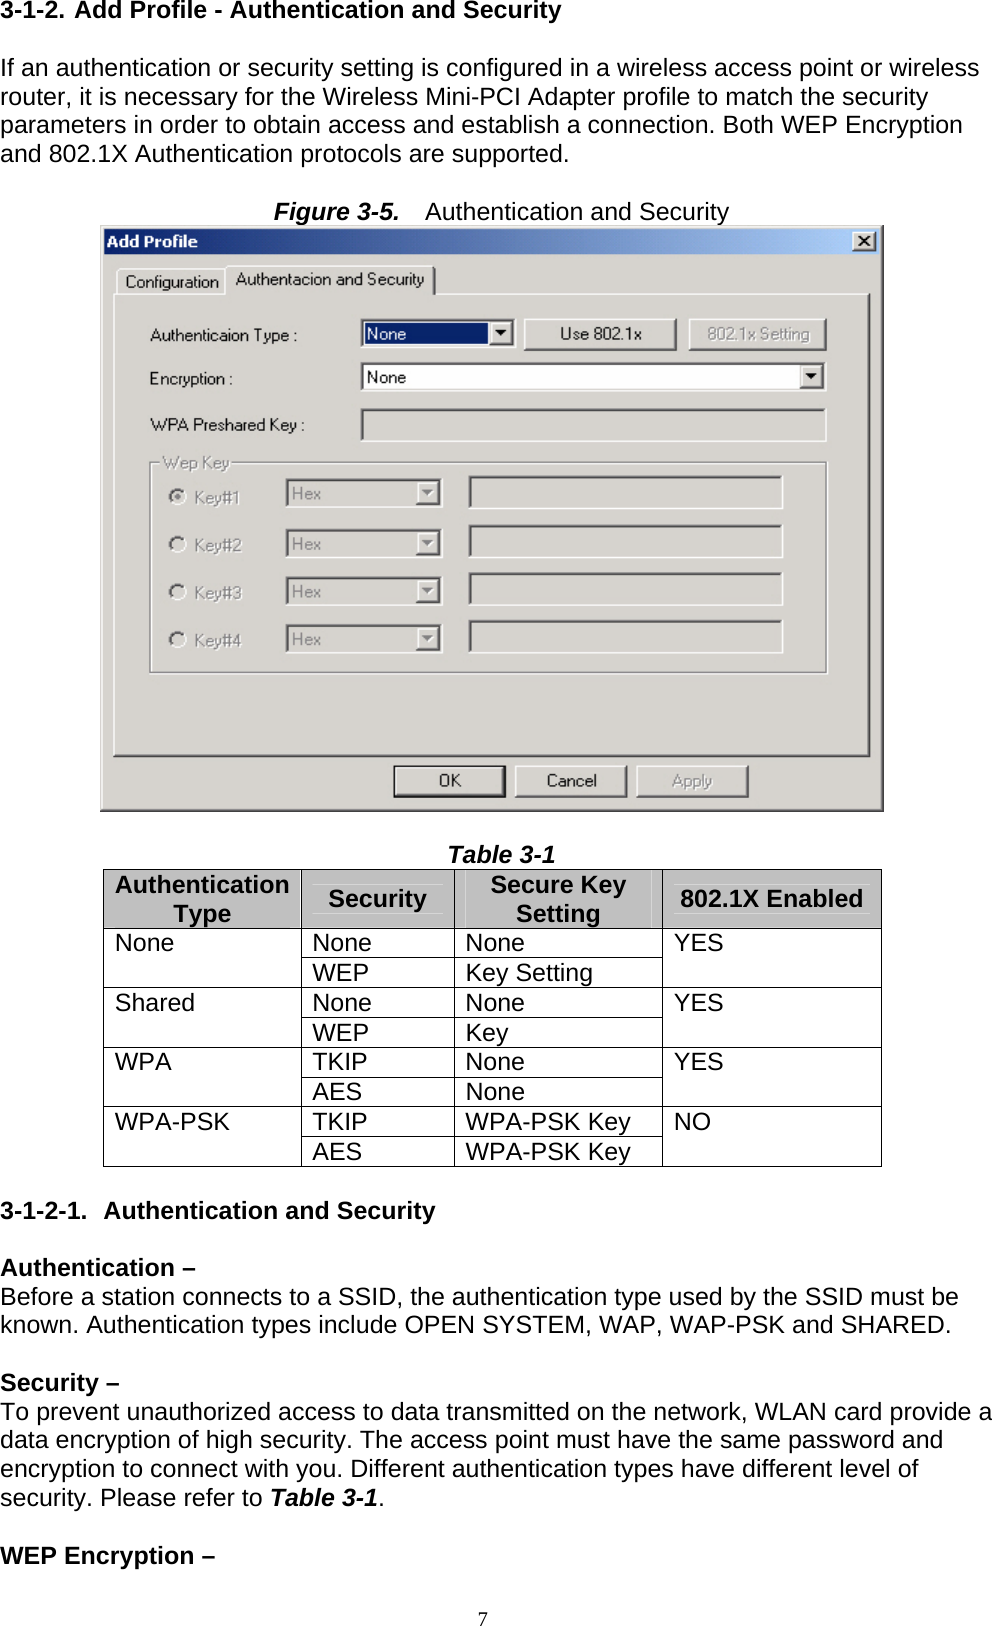 7  3-1-2. Add Profile - Authentication and Security  If an authentication or security setting is configured in a wireless access point or wireless router, it is necessary for the Wireless Mini-PCI Adapter profile to match the security parameters in order to obtain access and establish a connection. Both WEP Encryption and 802.1X Authentication protocols are supported.  Figure 3-5.    Authentication and Security   Table 3-1 Authentication Type  Security  Secure Key Setting  802.1X Enabled None None None  WEP Key Setting YES None None Shared  WEP Key   YES TKIP None WPA  AES None  YES TKIP WPA-PSK Key WPA-PSK  AES WPA-PSK Key NO  3-1-2-1.  Authentication and Security  Authentication –   Before a station connects to a SSID, the authentication type used by the SSID must be known. Authentication types include OPEN SYSTEM, WAP, WAP-PSK and SHARED.  Security –   To prevent unauthorized access to data transmitted on the network, WLAN card provide a data encryption of high security. The access point must have the same password and encryption to connect with you. Different authentication types have different level of security. Please refer to Table 3-1.  WEP Encryption –   